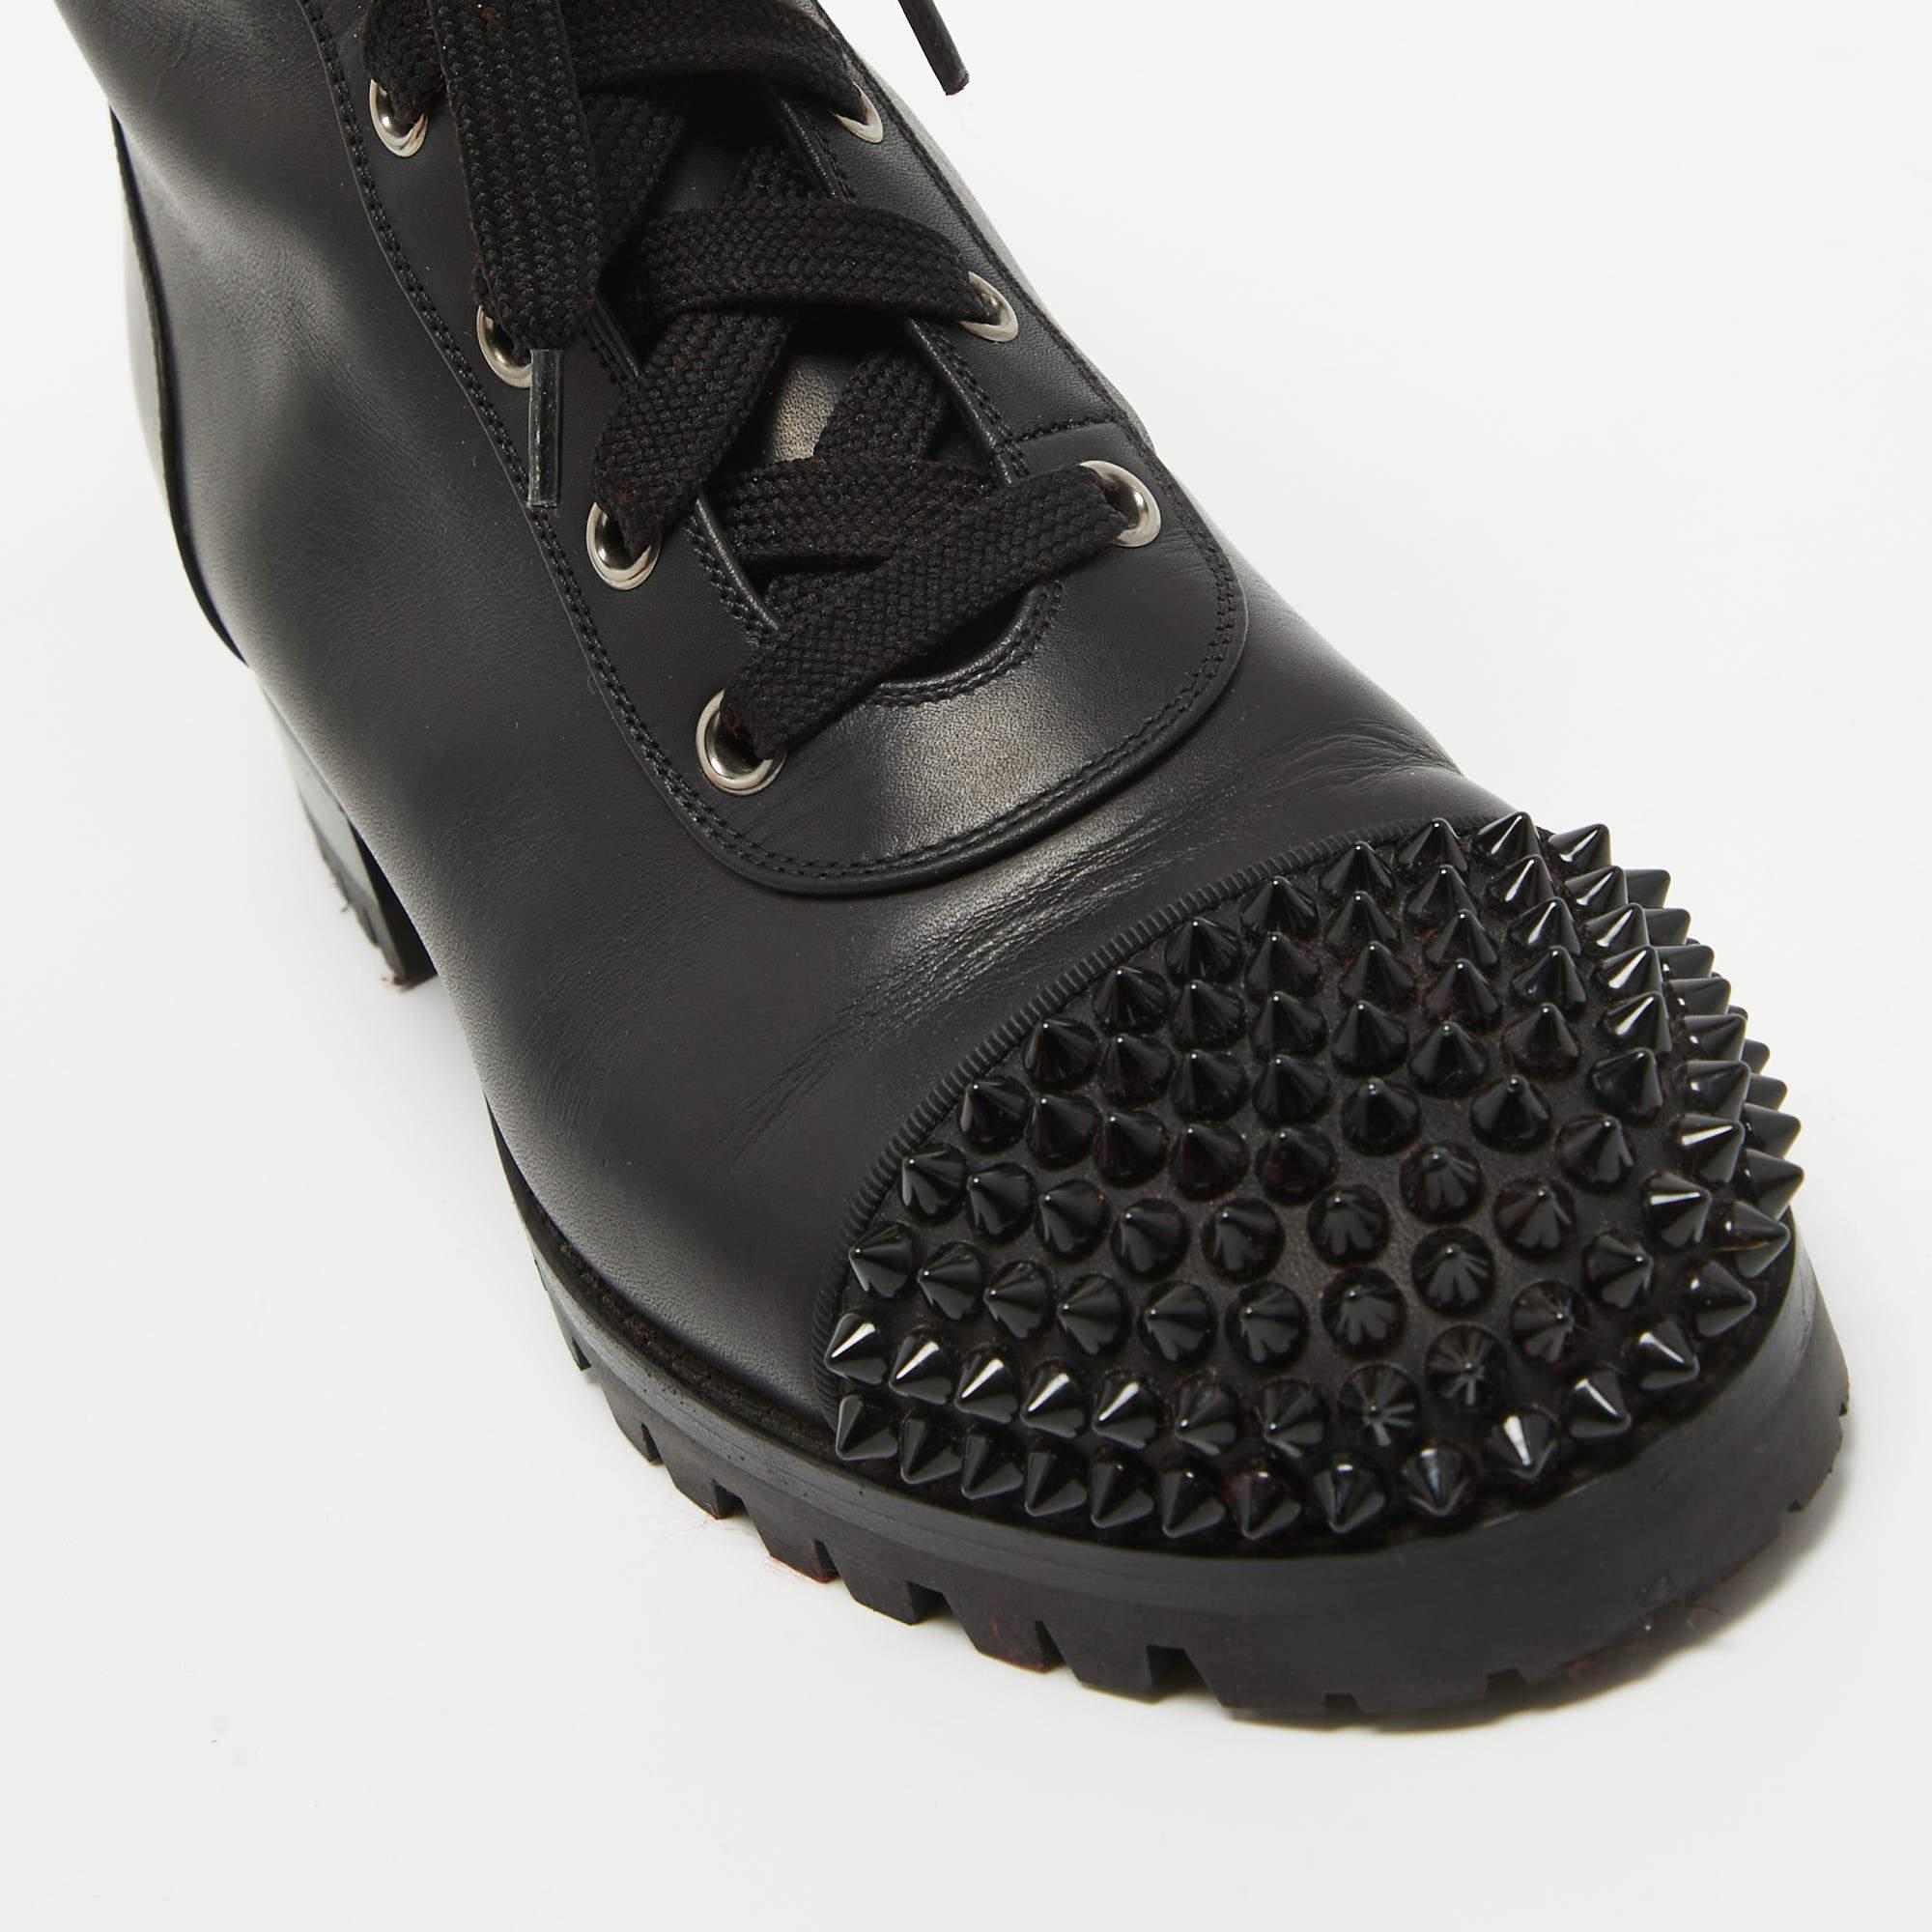 Christian Louboutin Black Leather TS Croc Spiked Ankle Boots Size 36 For Sale 3